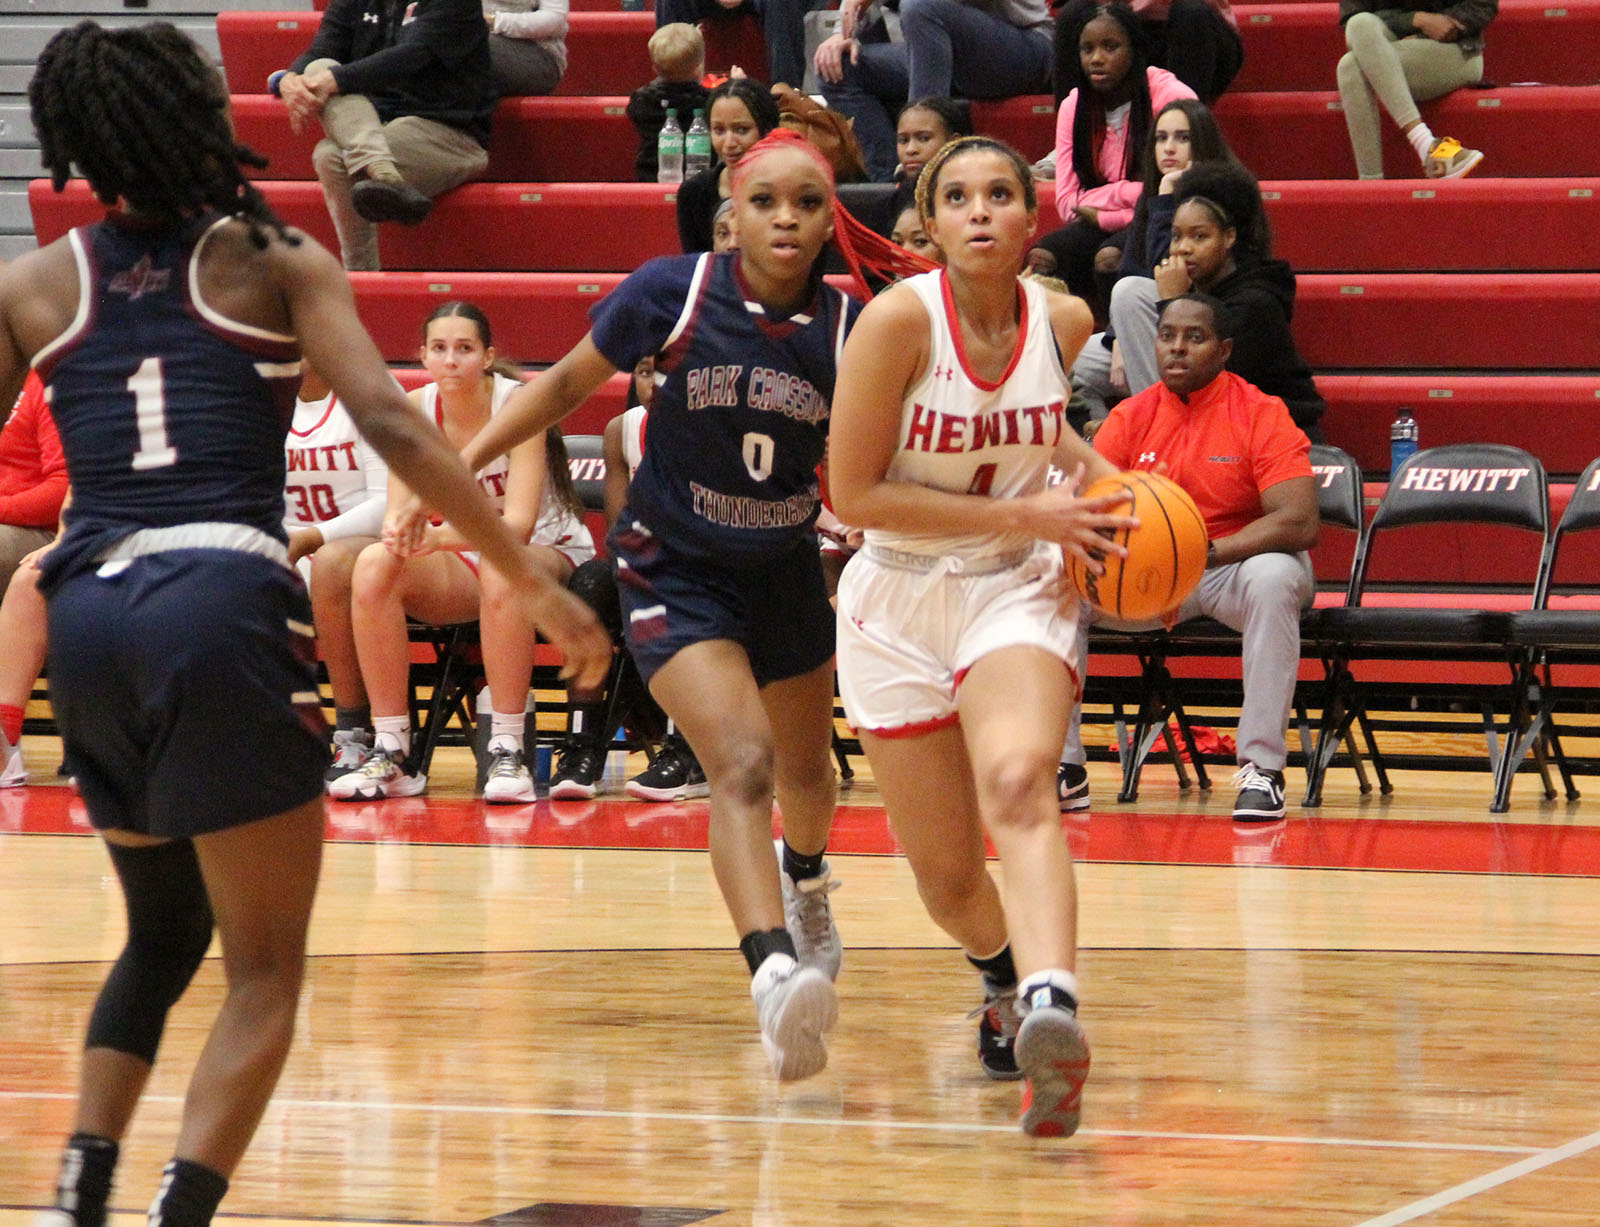 Lady Huskies roll all over Park Crossing, 69-26